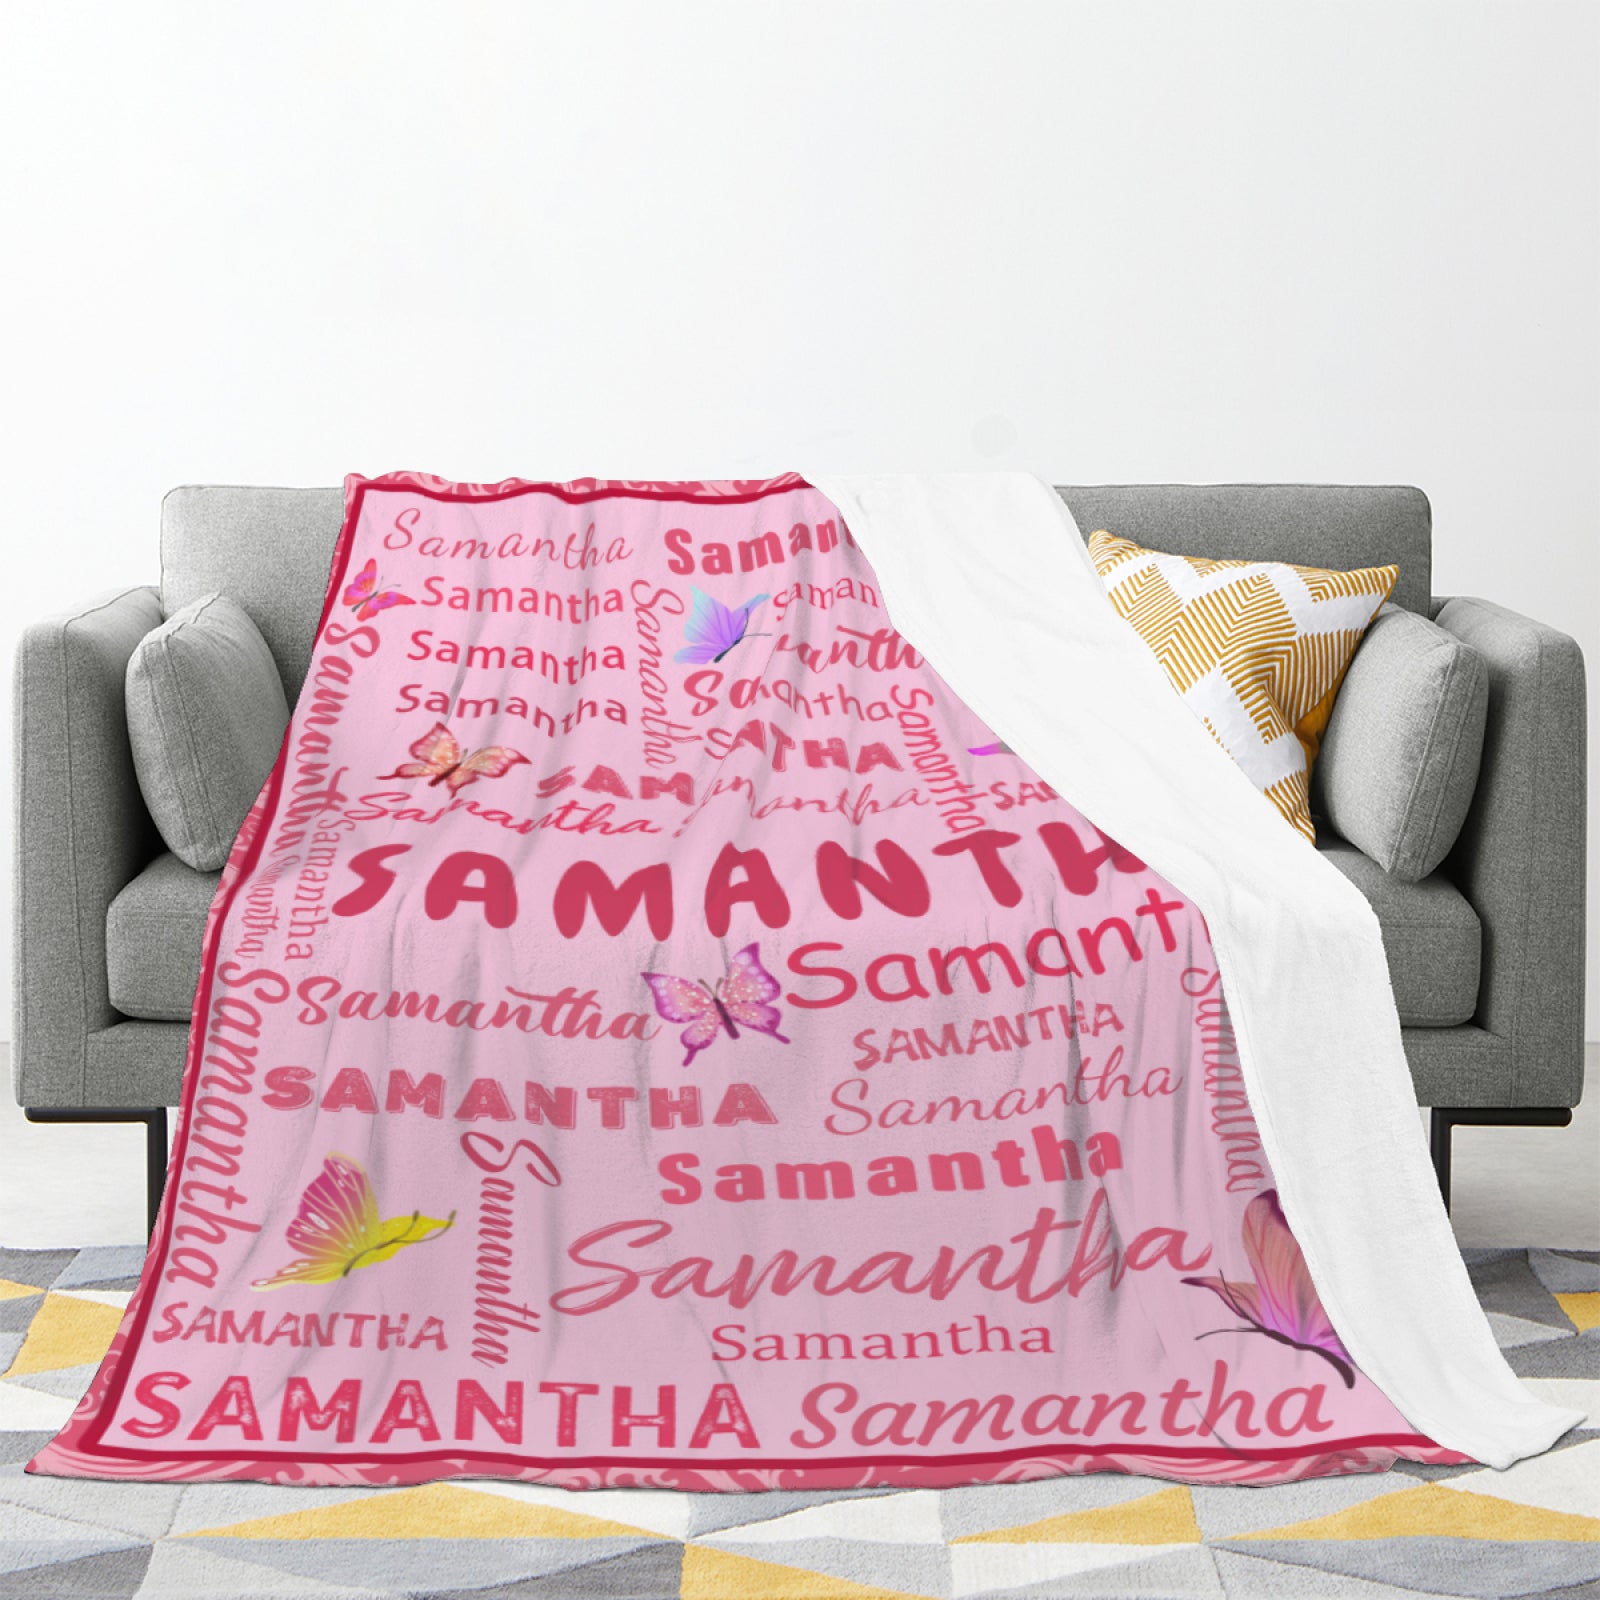 Personalized Blanket with Name - For Girls Boys Adults Baby- Gifts Blanket for Christmas Birthday Valentines Day (Pink)